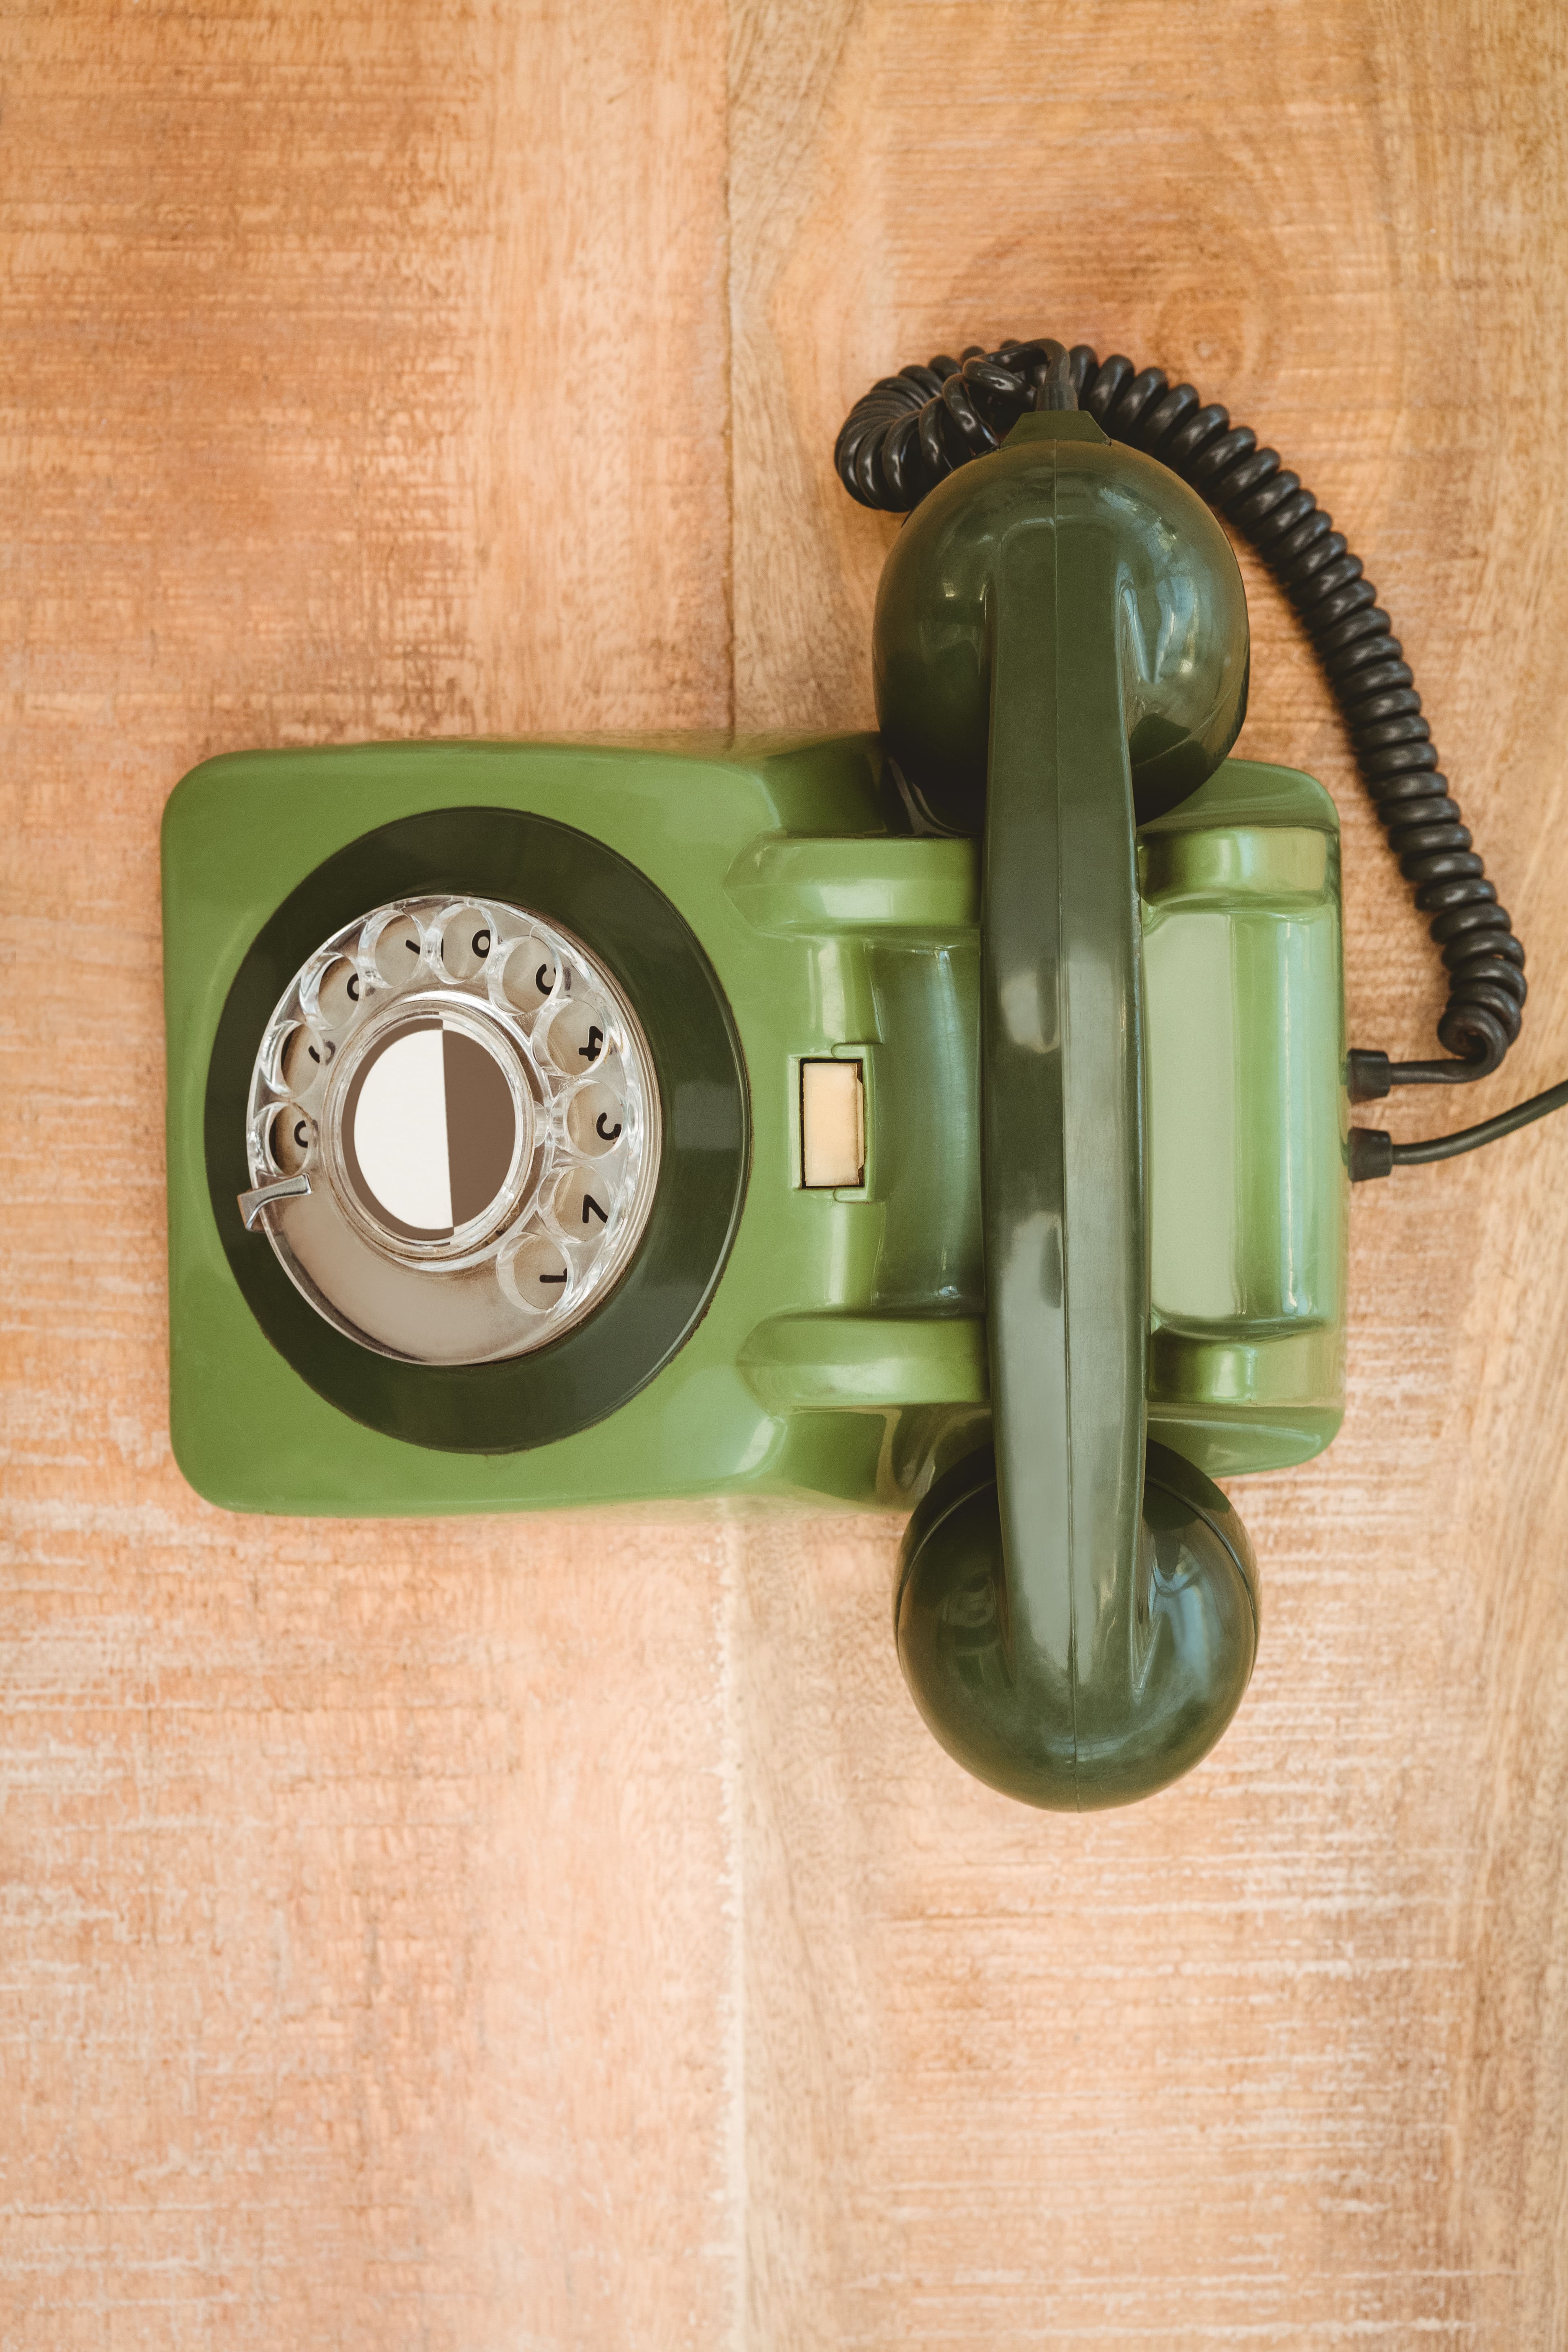 view-of-an-old-phone-on-wood-desk